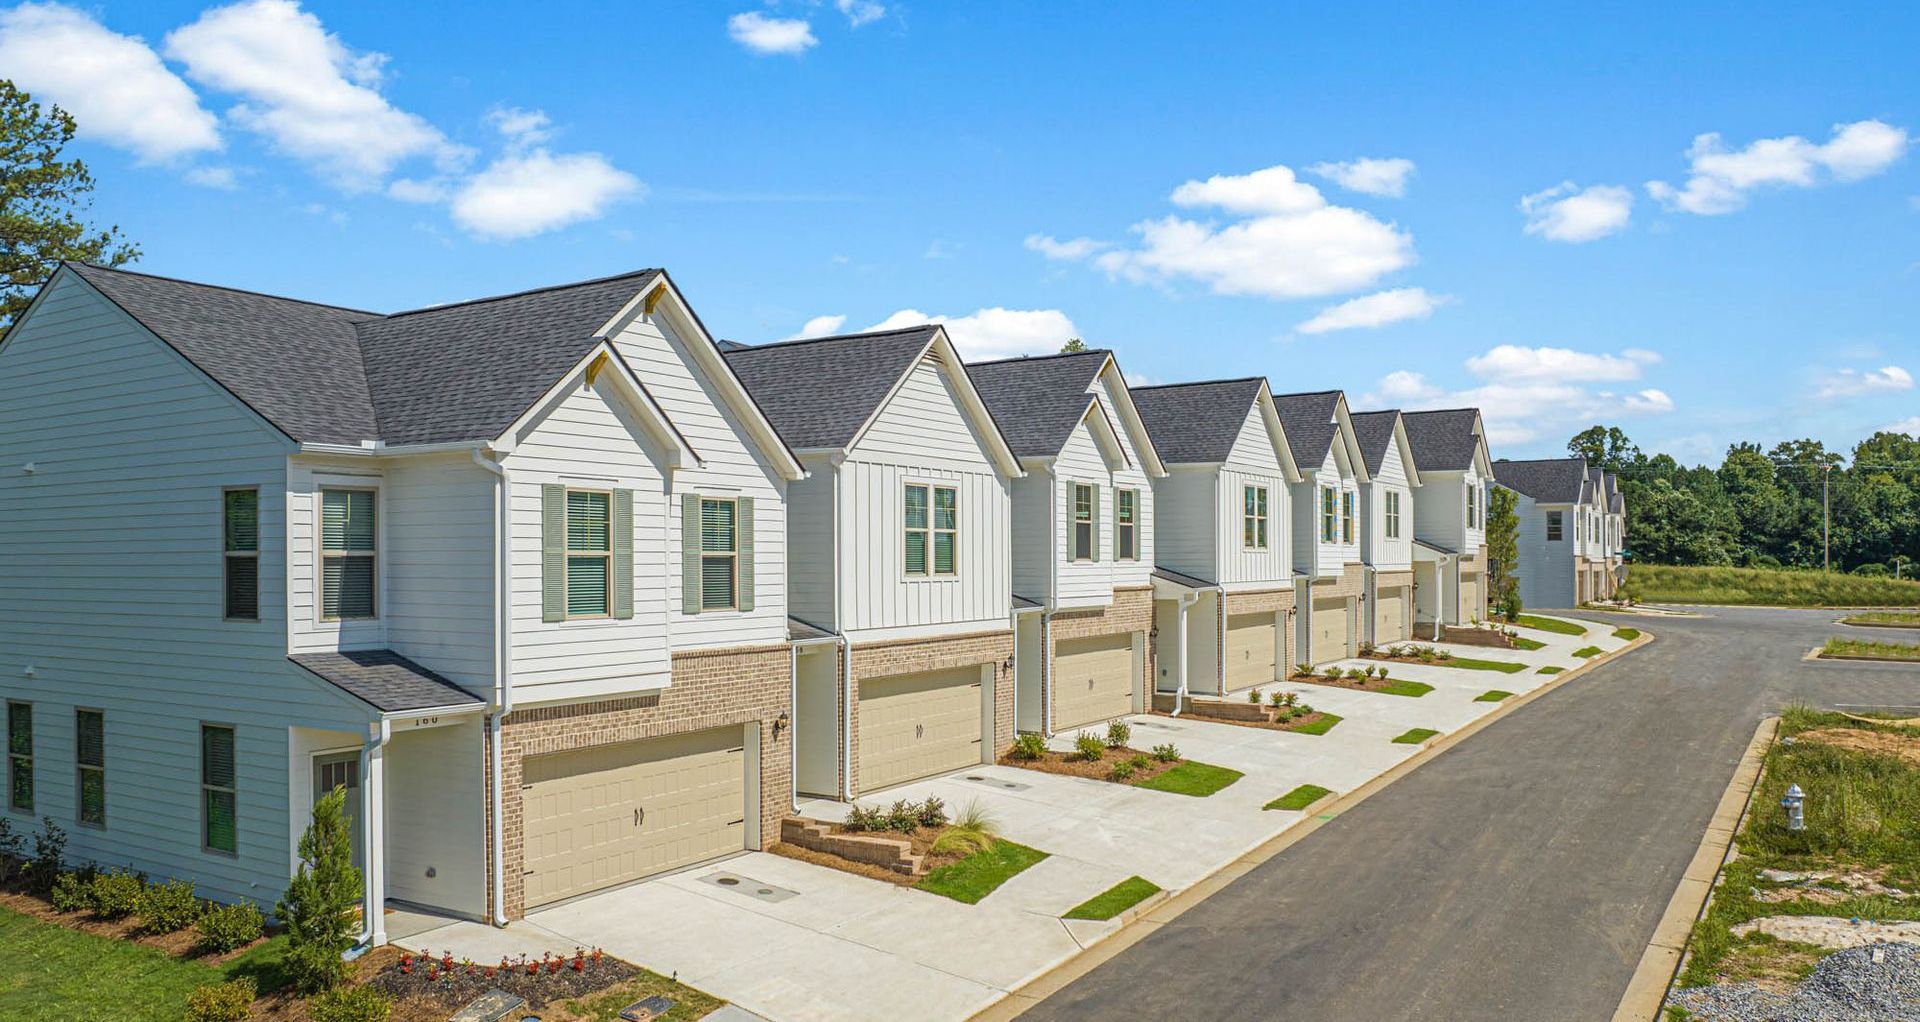 A row of white houses sitting next to each other on a sunny day at Mayridge Canton FKA Summerwalk Townhomes